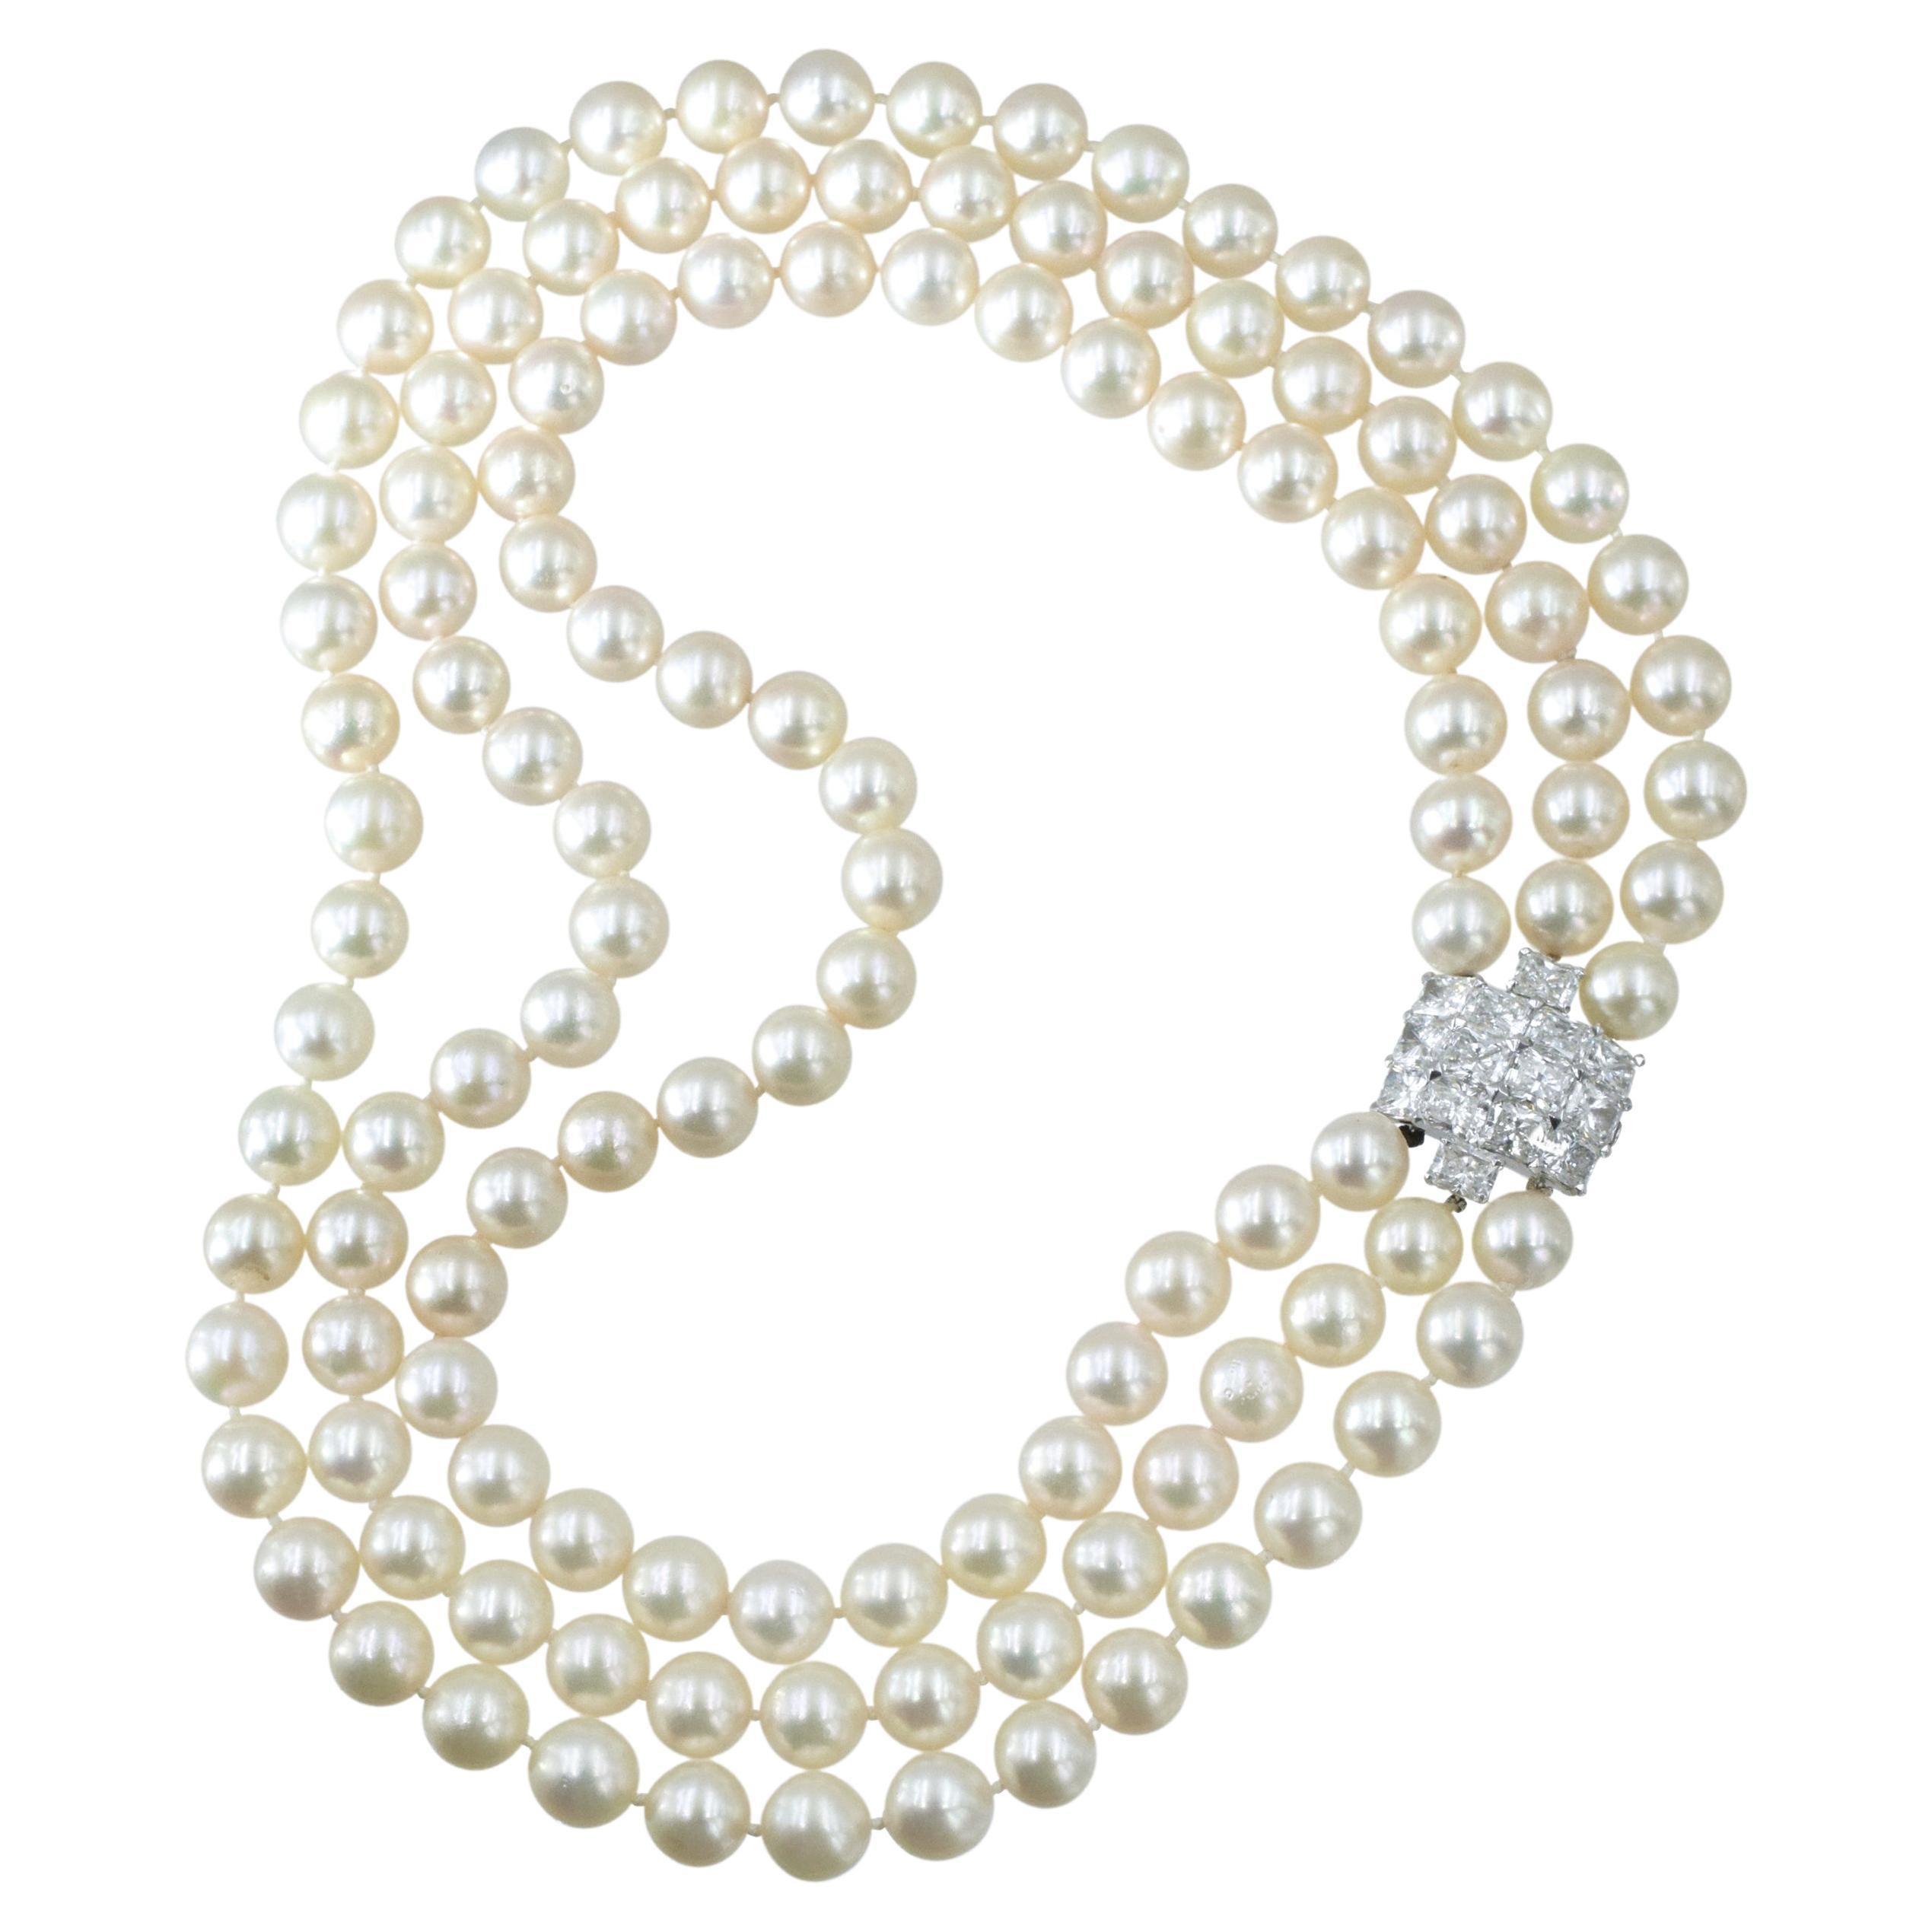 Cartier Diamond and Pearl Necklace